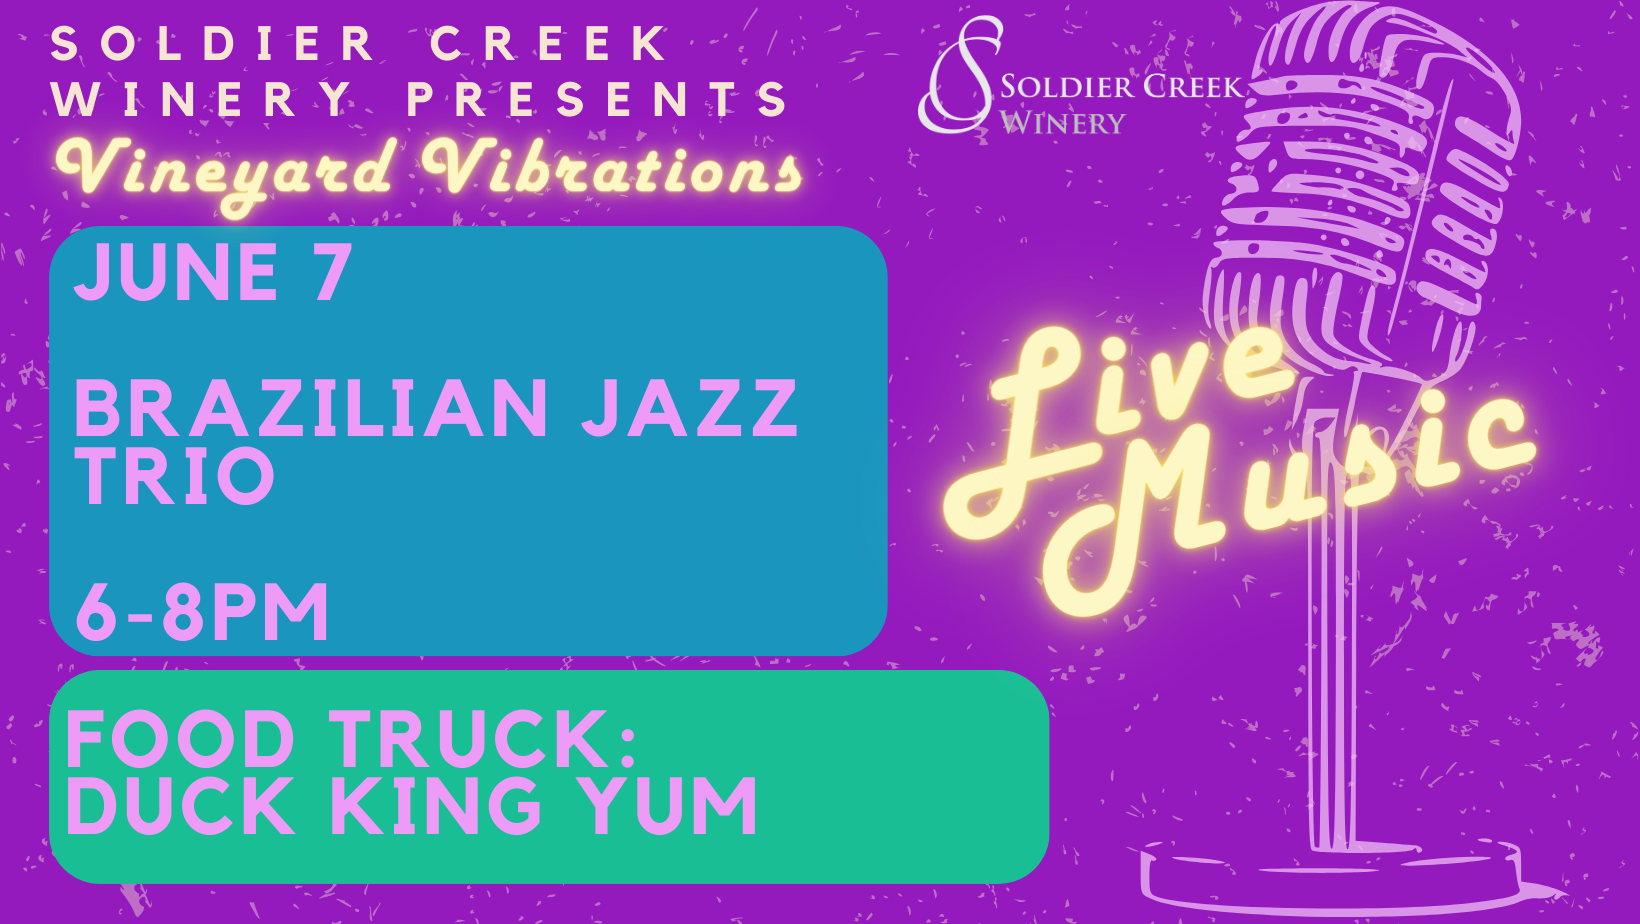 free live music every friday at solider creek winery. friday june 7 is the brazilian jazz trio from 6-8pm. dinner available for purchase from duck king yum food truck.